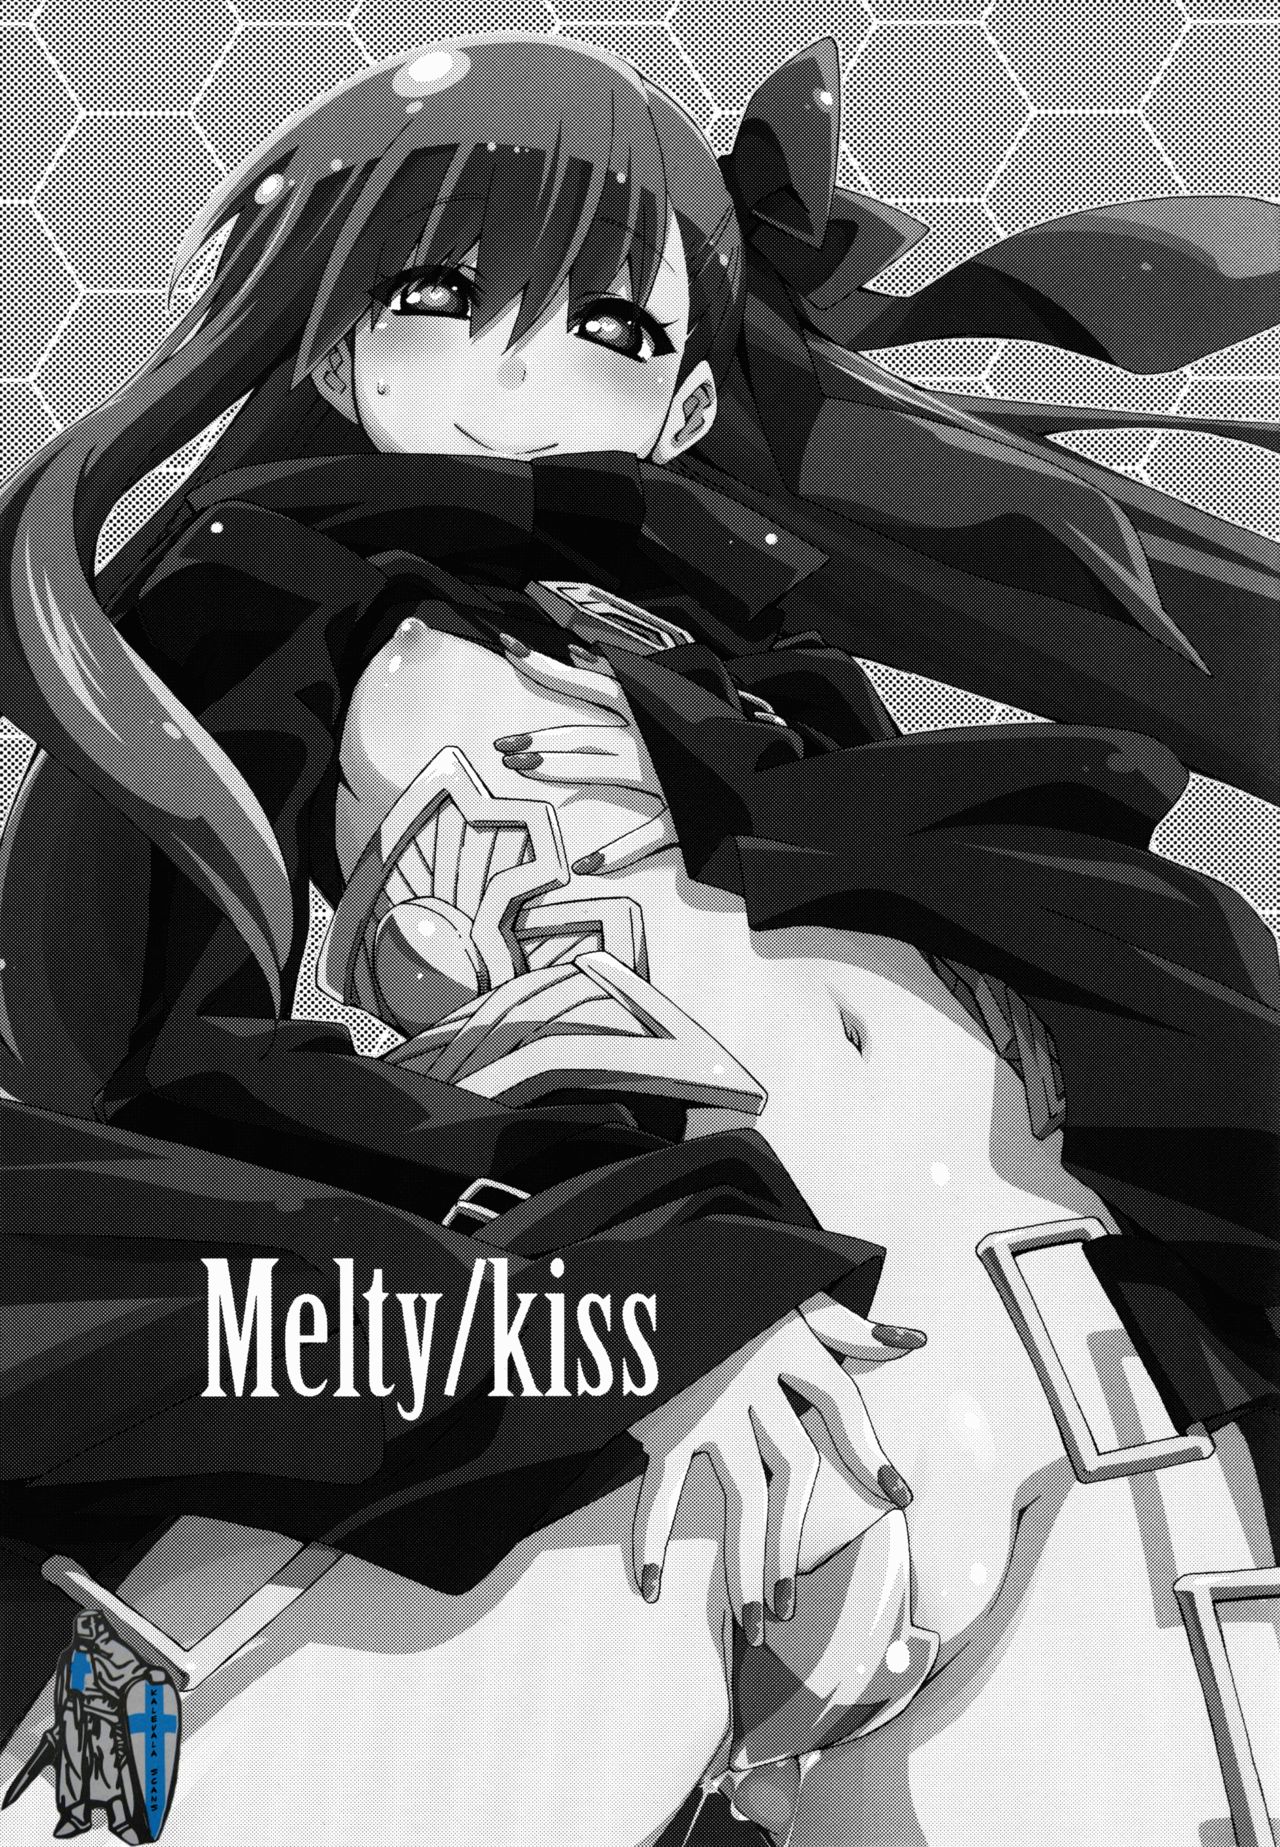 (C85) [カリーバーグディッシュ (未影)] Melty/kiss (Fate/EXTRA)